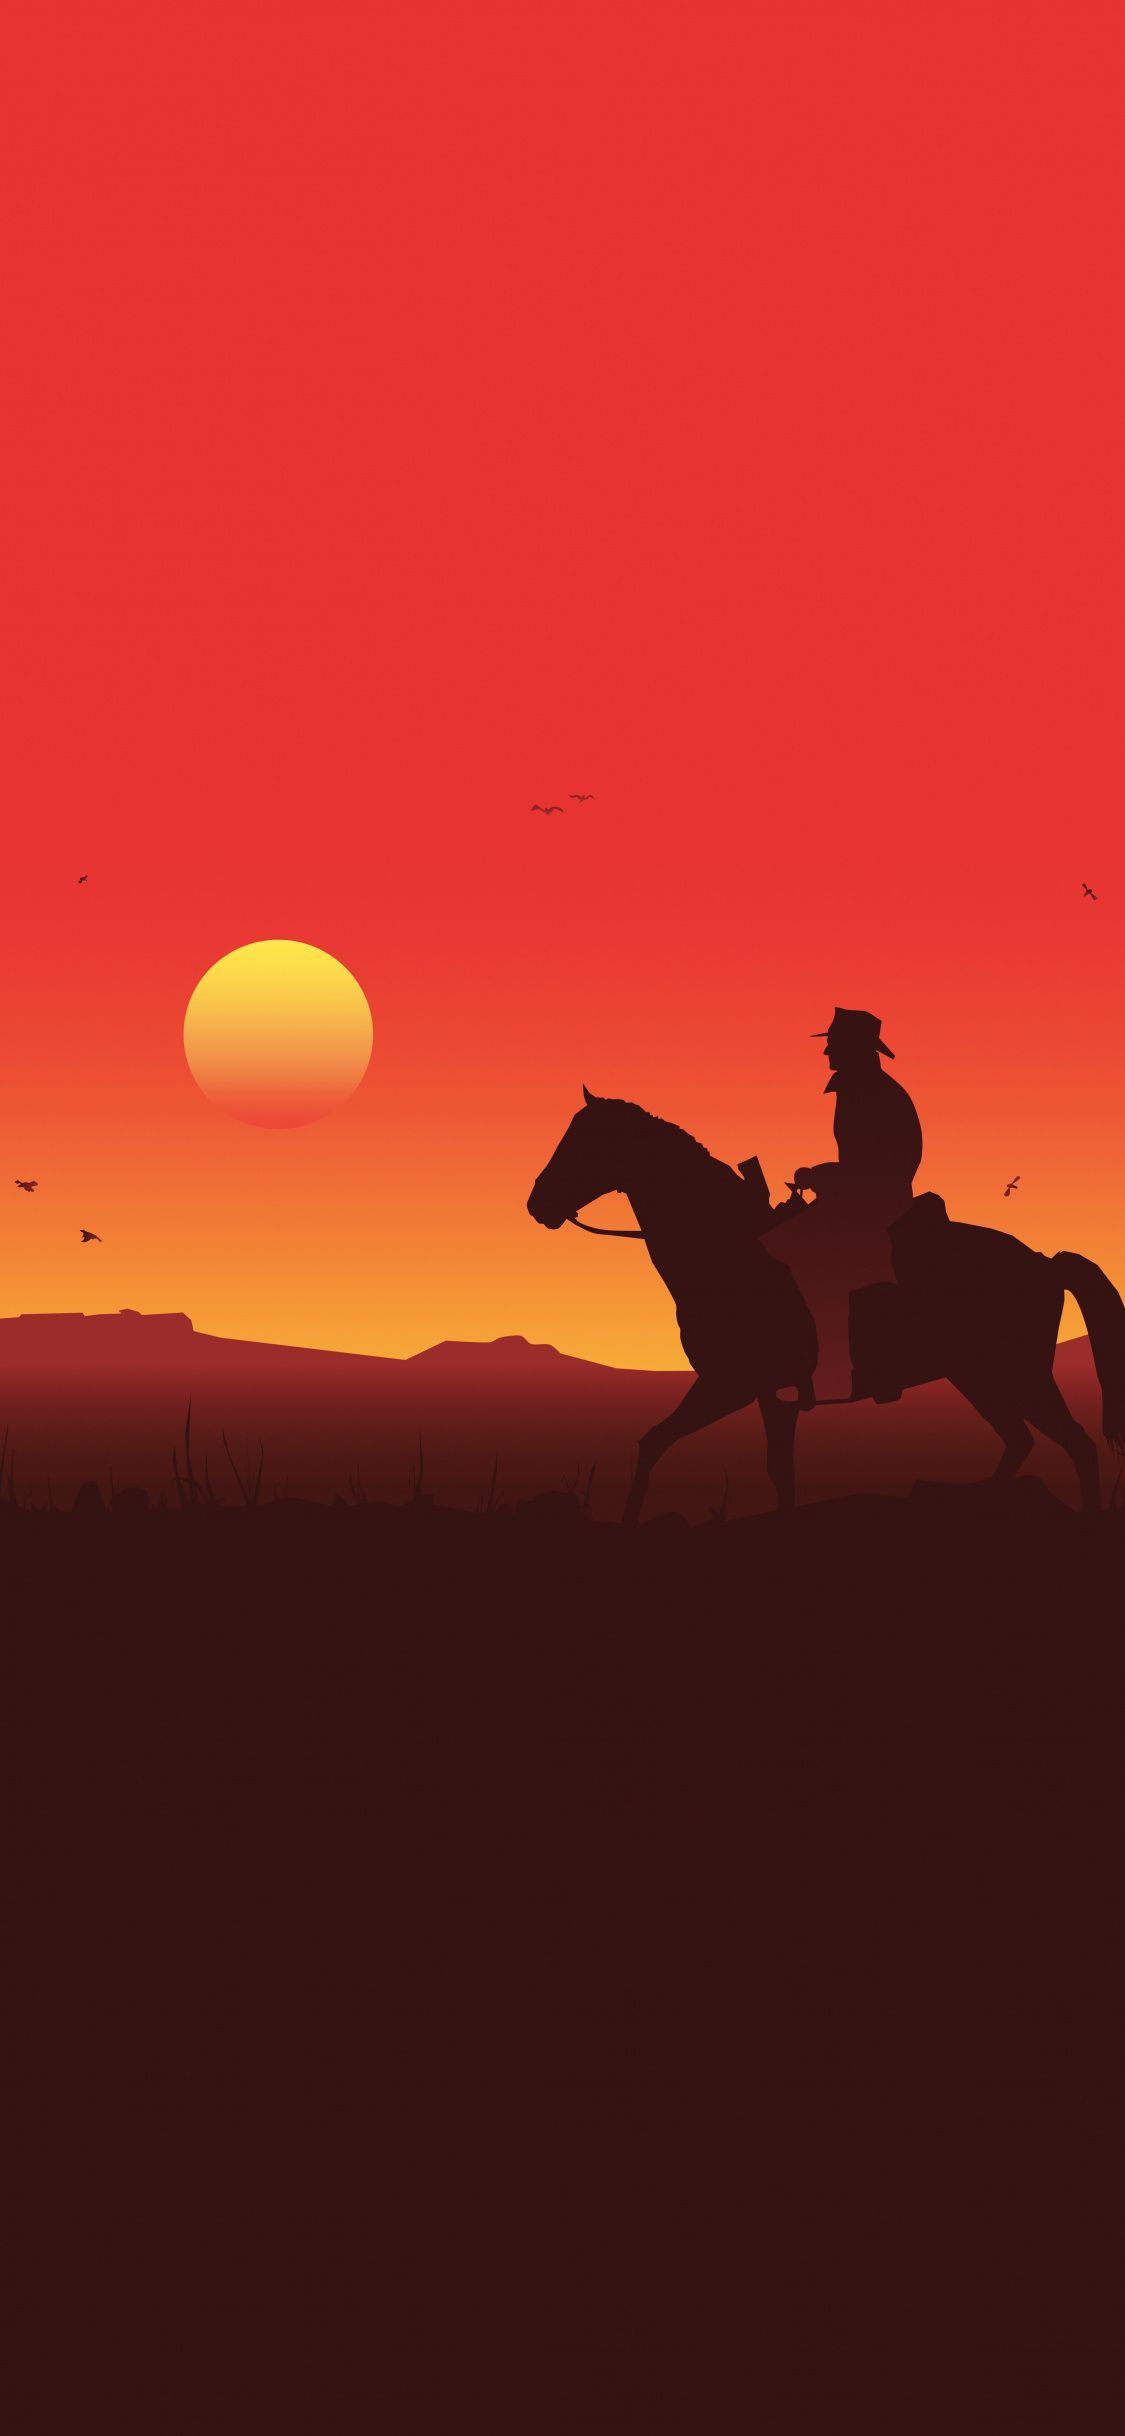 Silhouette, Red Dead Redemption sunset, 1125x2436 wallpaper. Red dead redemption artwork, Red dead redemption art, Red dead redemption